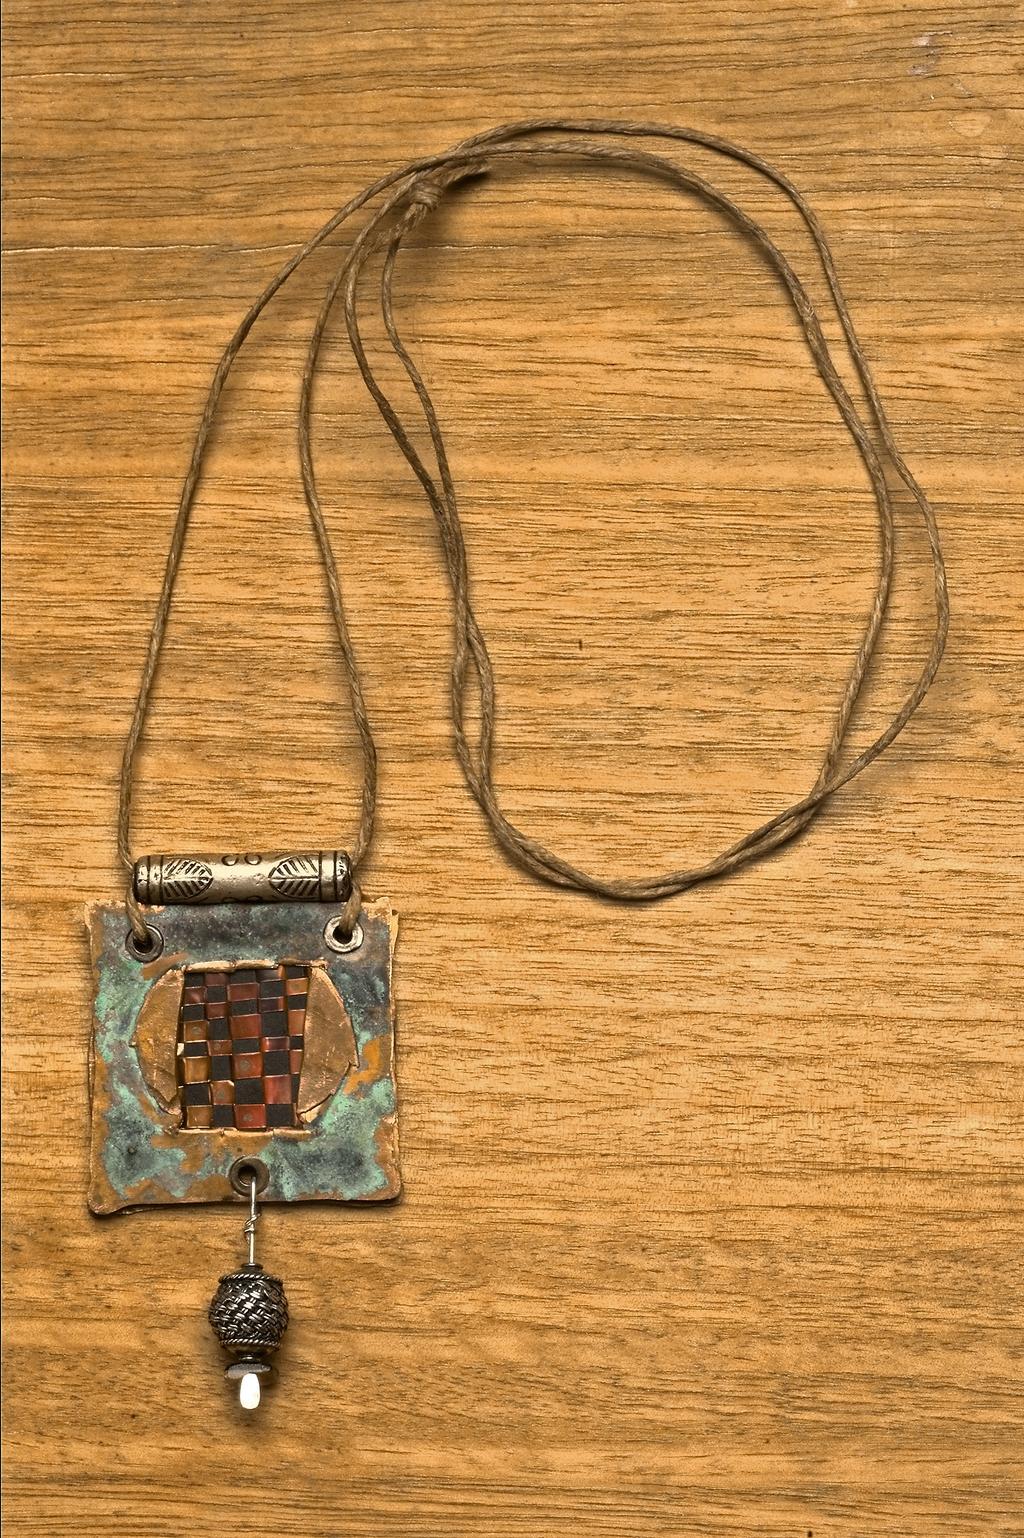 beginner metal Woven in Copper Copper windows showcase beautifully woven bands in a simple but stylish pendant by Mary Hettmansperger C opper is one of the most colorful and economical metals on the